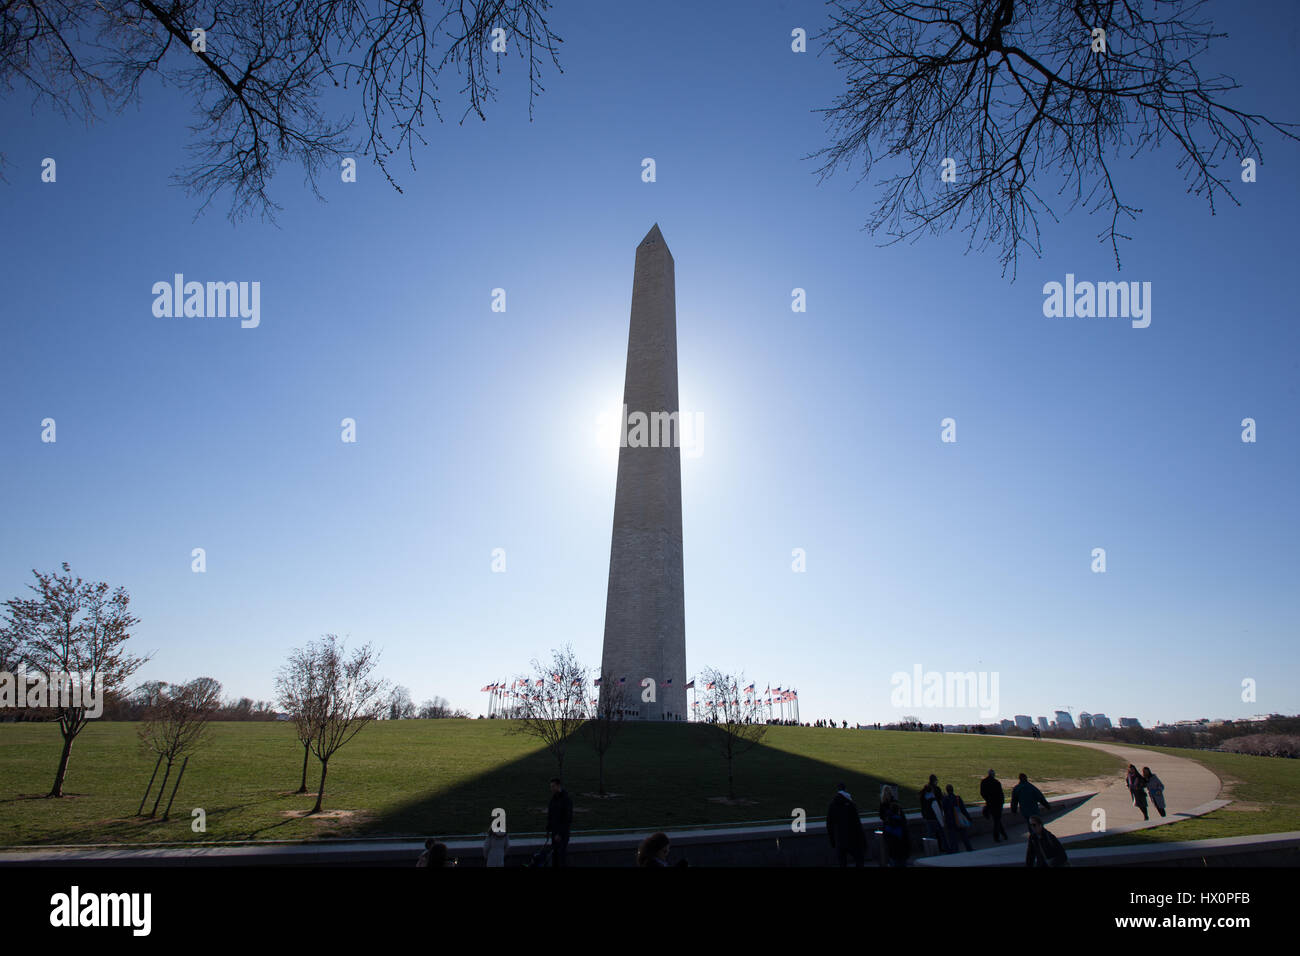 Tourists view the Washington Monument on the National Mall in Washington, D.C. March 22, 2017. Stock Photo